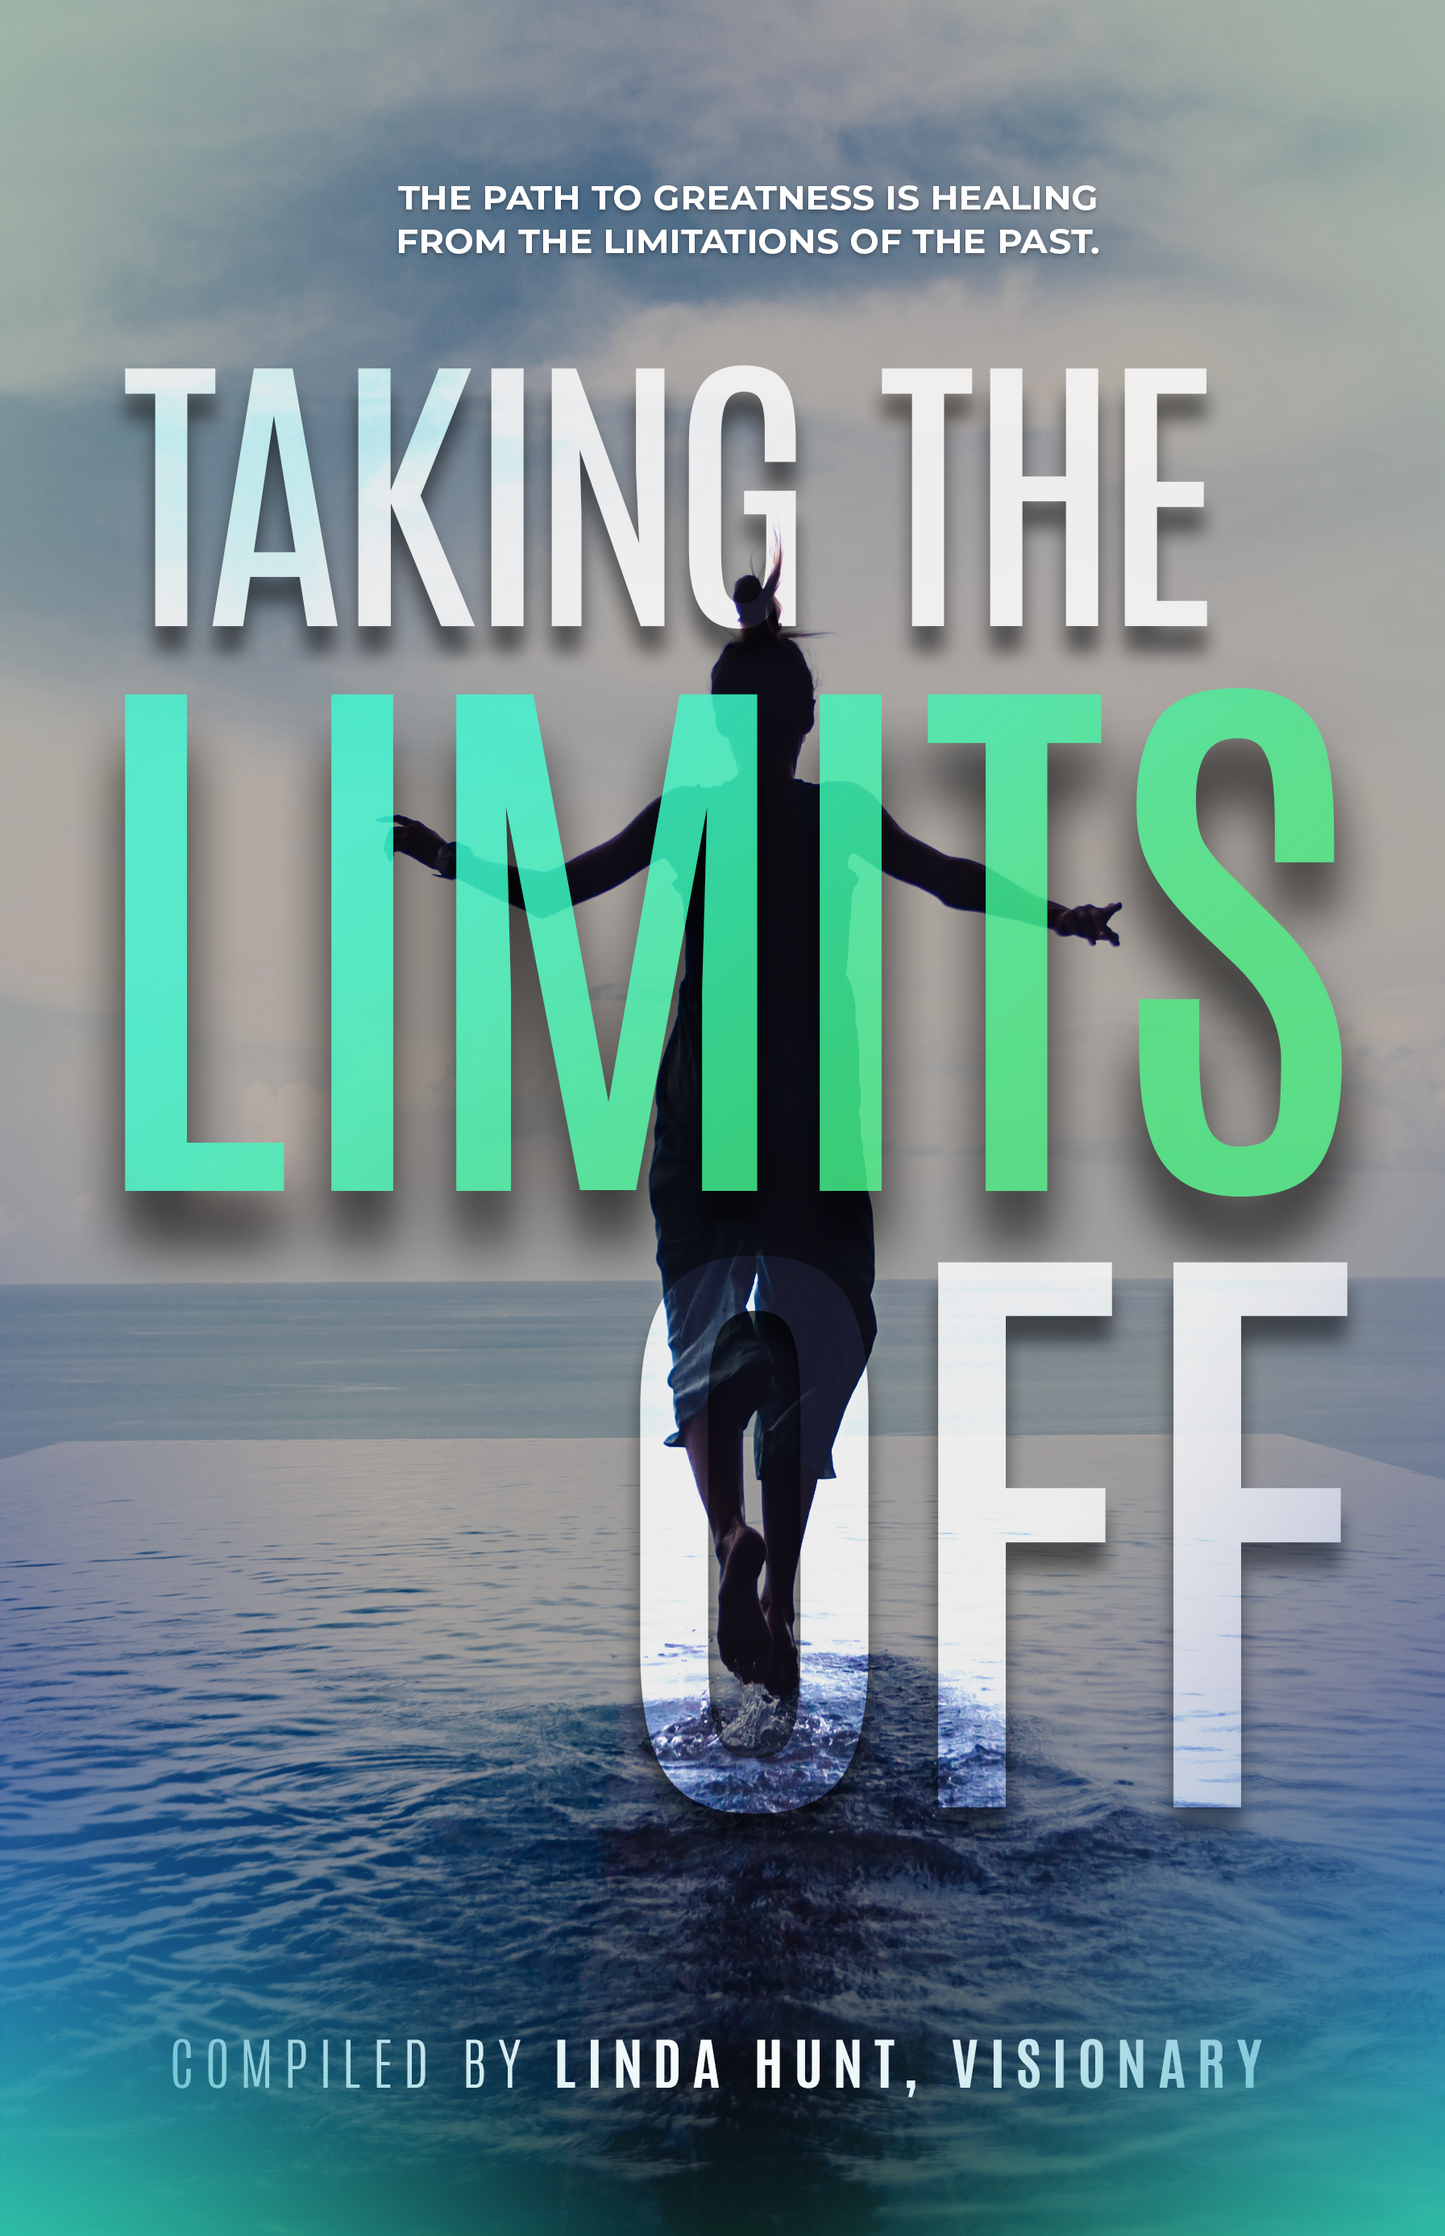 Take the Limits Off compiled by Linda Hunt